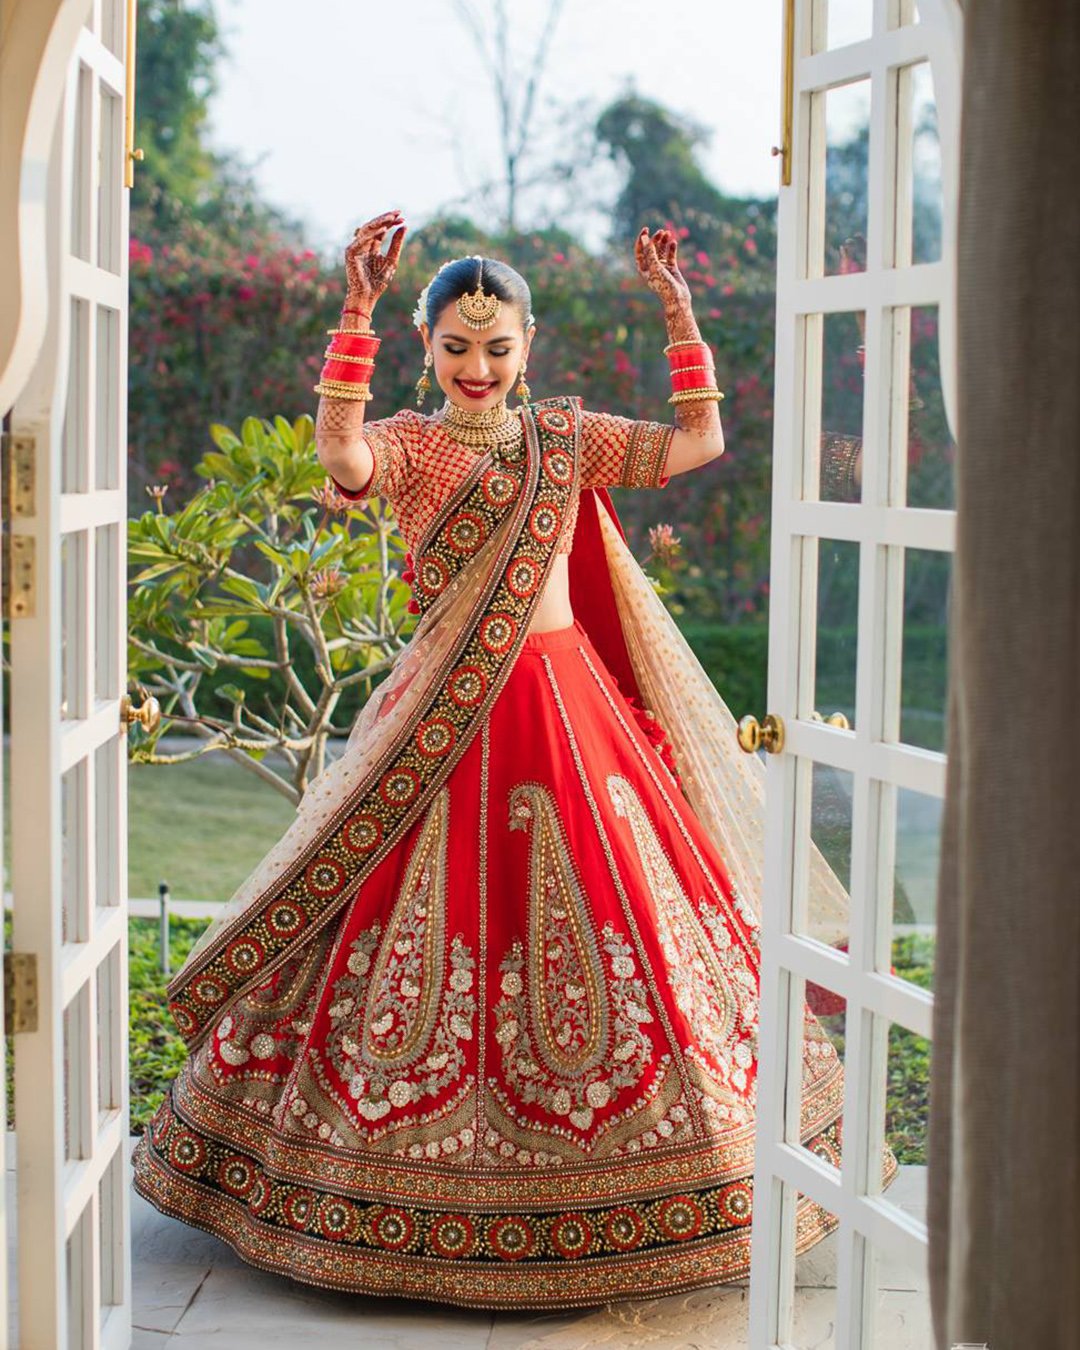 traditional indian wedding dresses,indian red bridal gown,designer traditional indian wedding dresses,punjabi modern red indian wedding dresses,lehenga modern red indian wedding dresses,traditional royal blue indian wedding dresses,skirt modern bridesmaid dresses patterns in kerala,traditional north indian wedding dress,